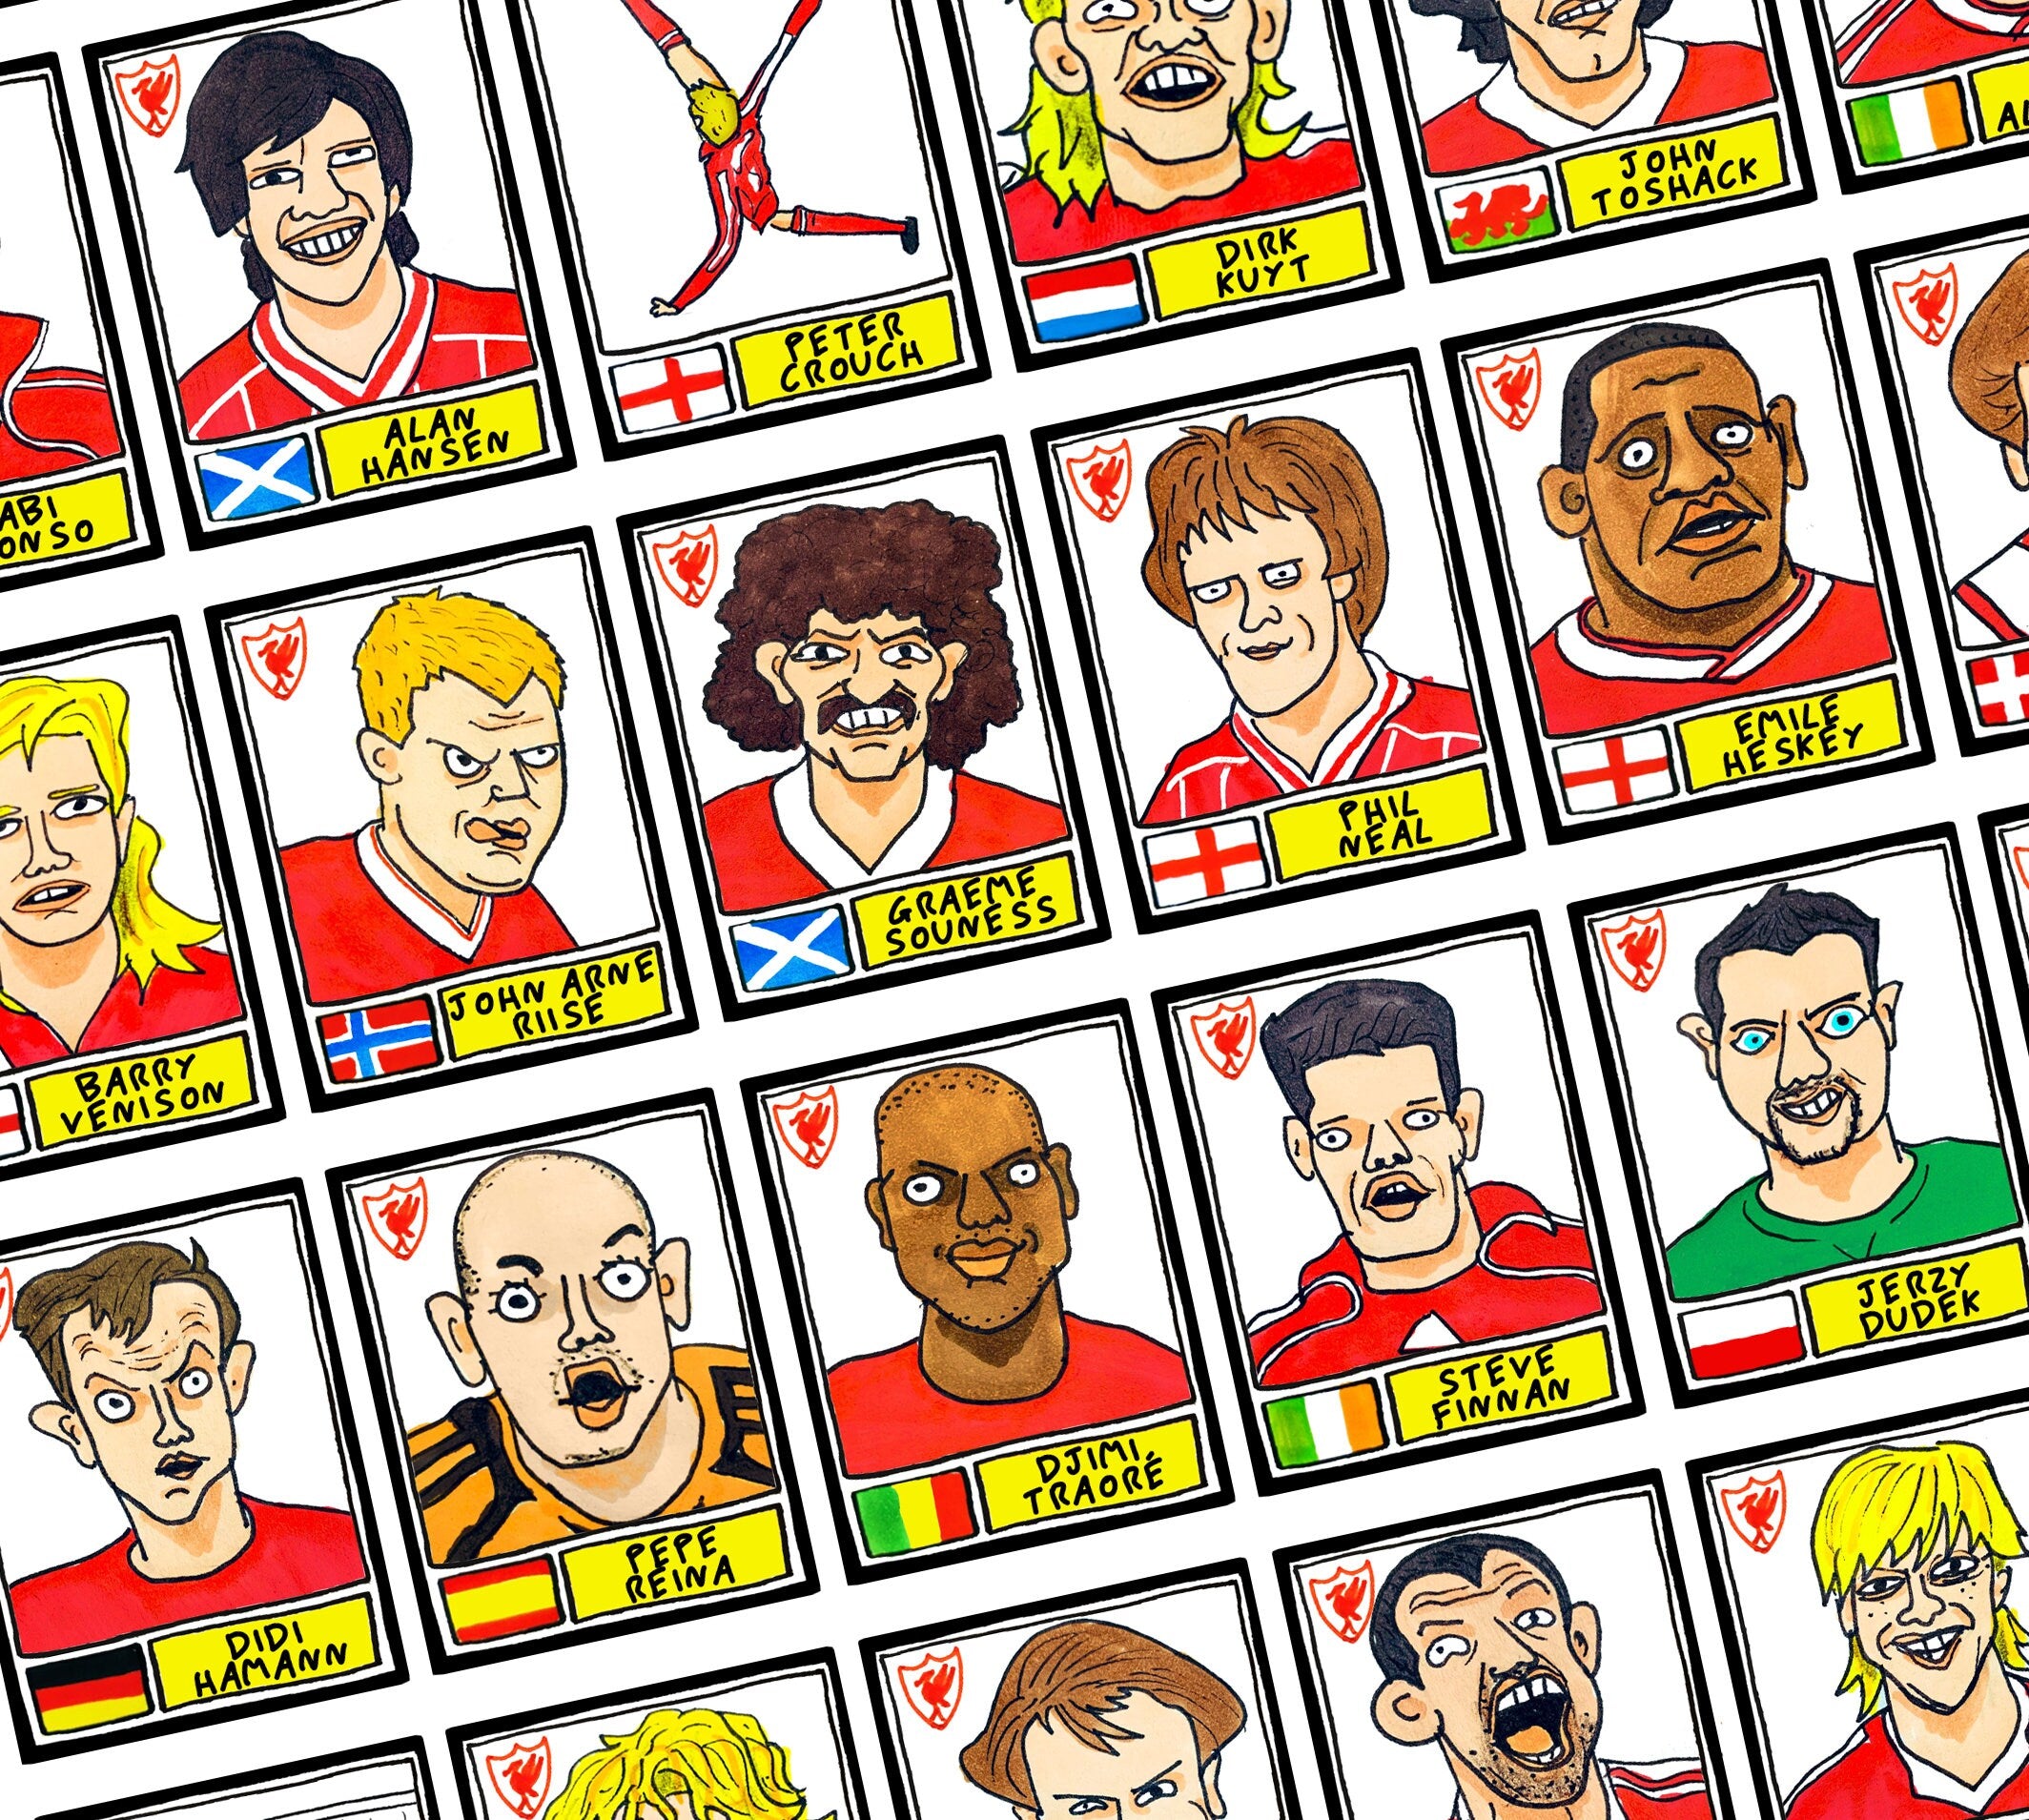 Liverpool Vol 4 - No Score Draws Kop Edition - A3 print of 36 Wonky  hand-drawn Panini-style Doodles of Various Liverpool LFC Reds Legends